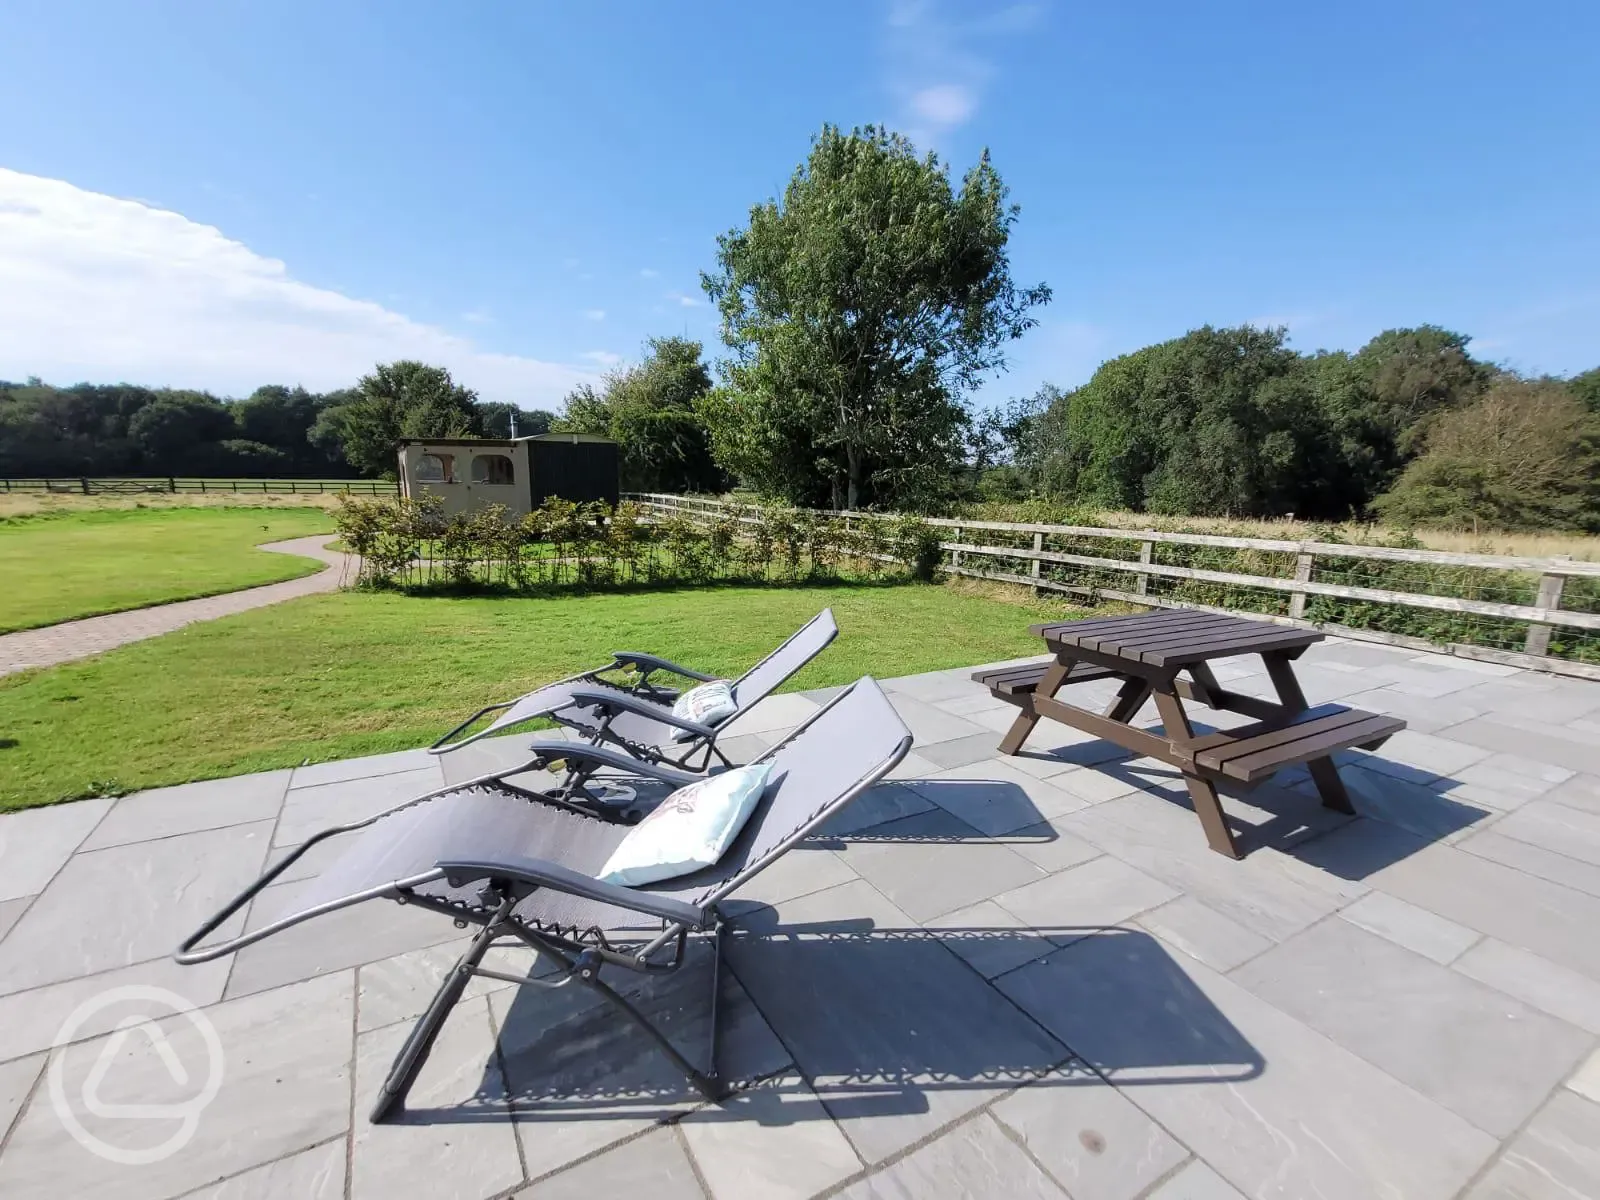 Your own patio with sunlounger chairs, table and BBQ stand 